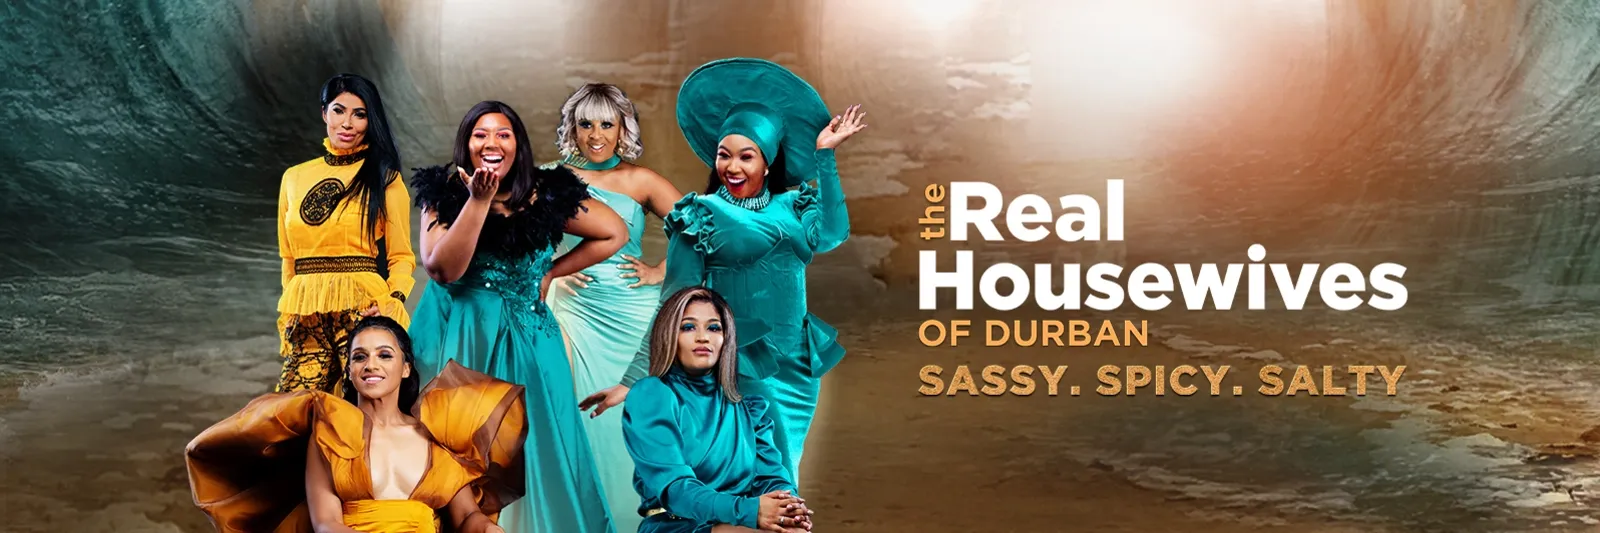 The Real Housewives Of Durban S04 (Episode 10 - 12 Added) 7